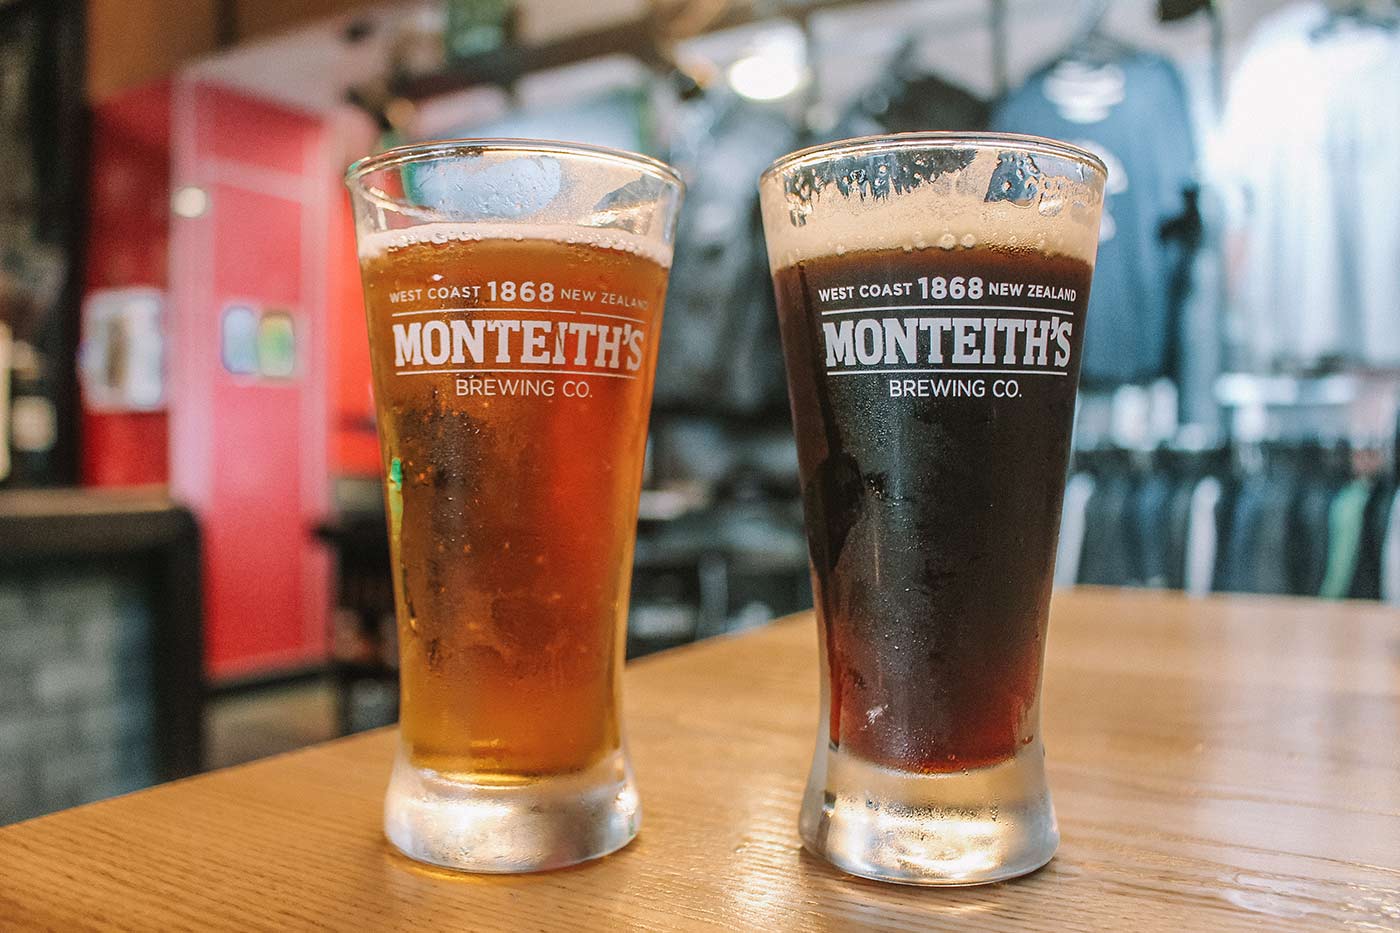 Visiting the Monteiths brewery in Greymouth, New Zealand blog post